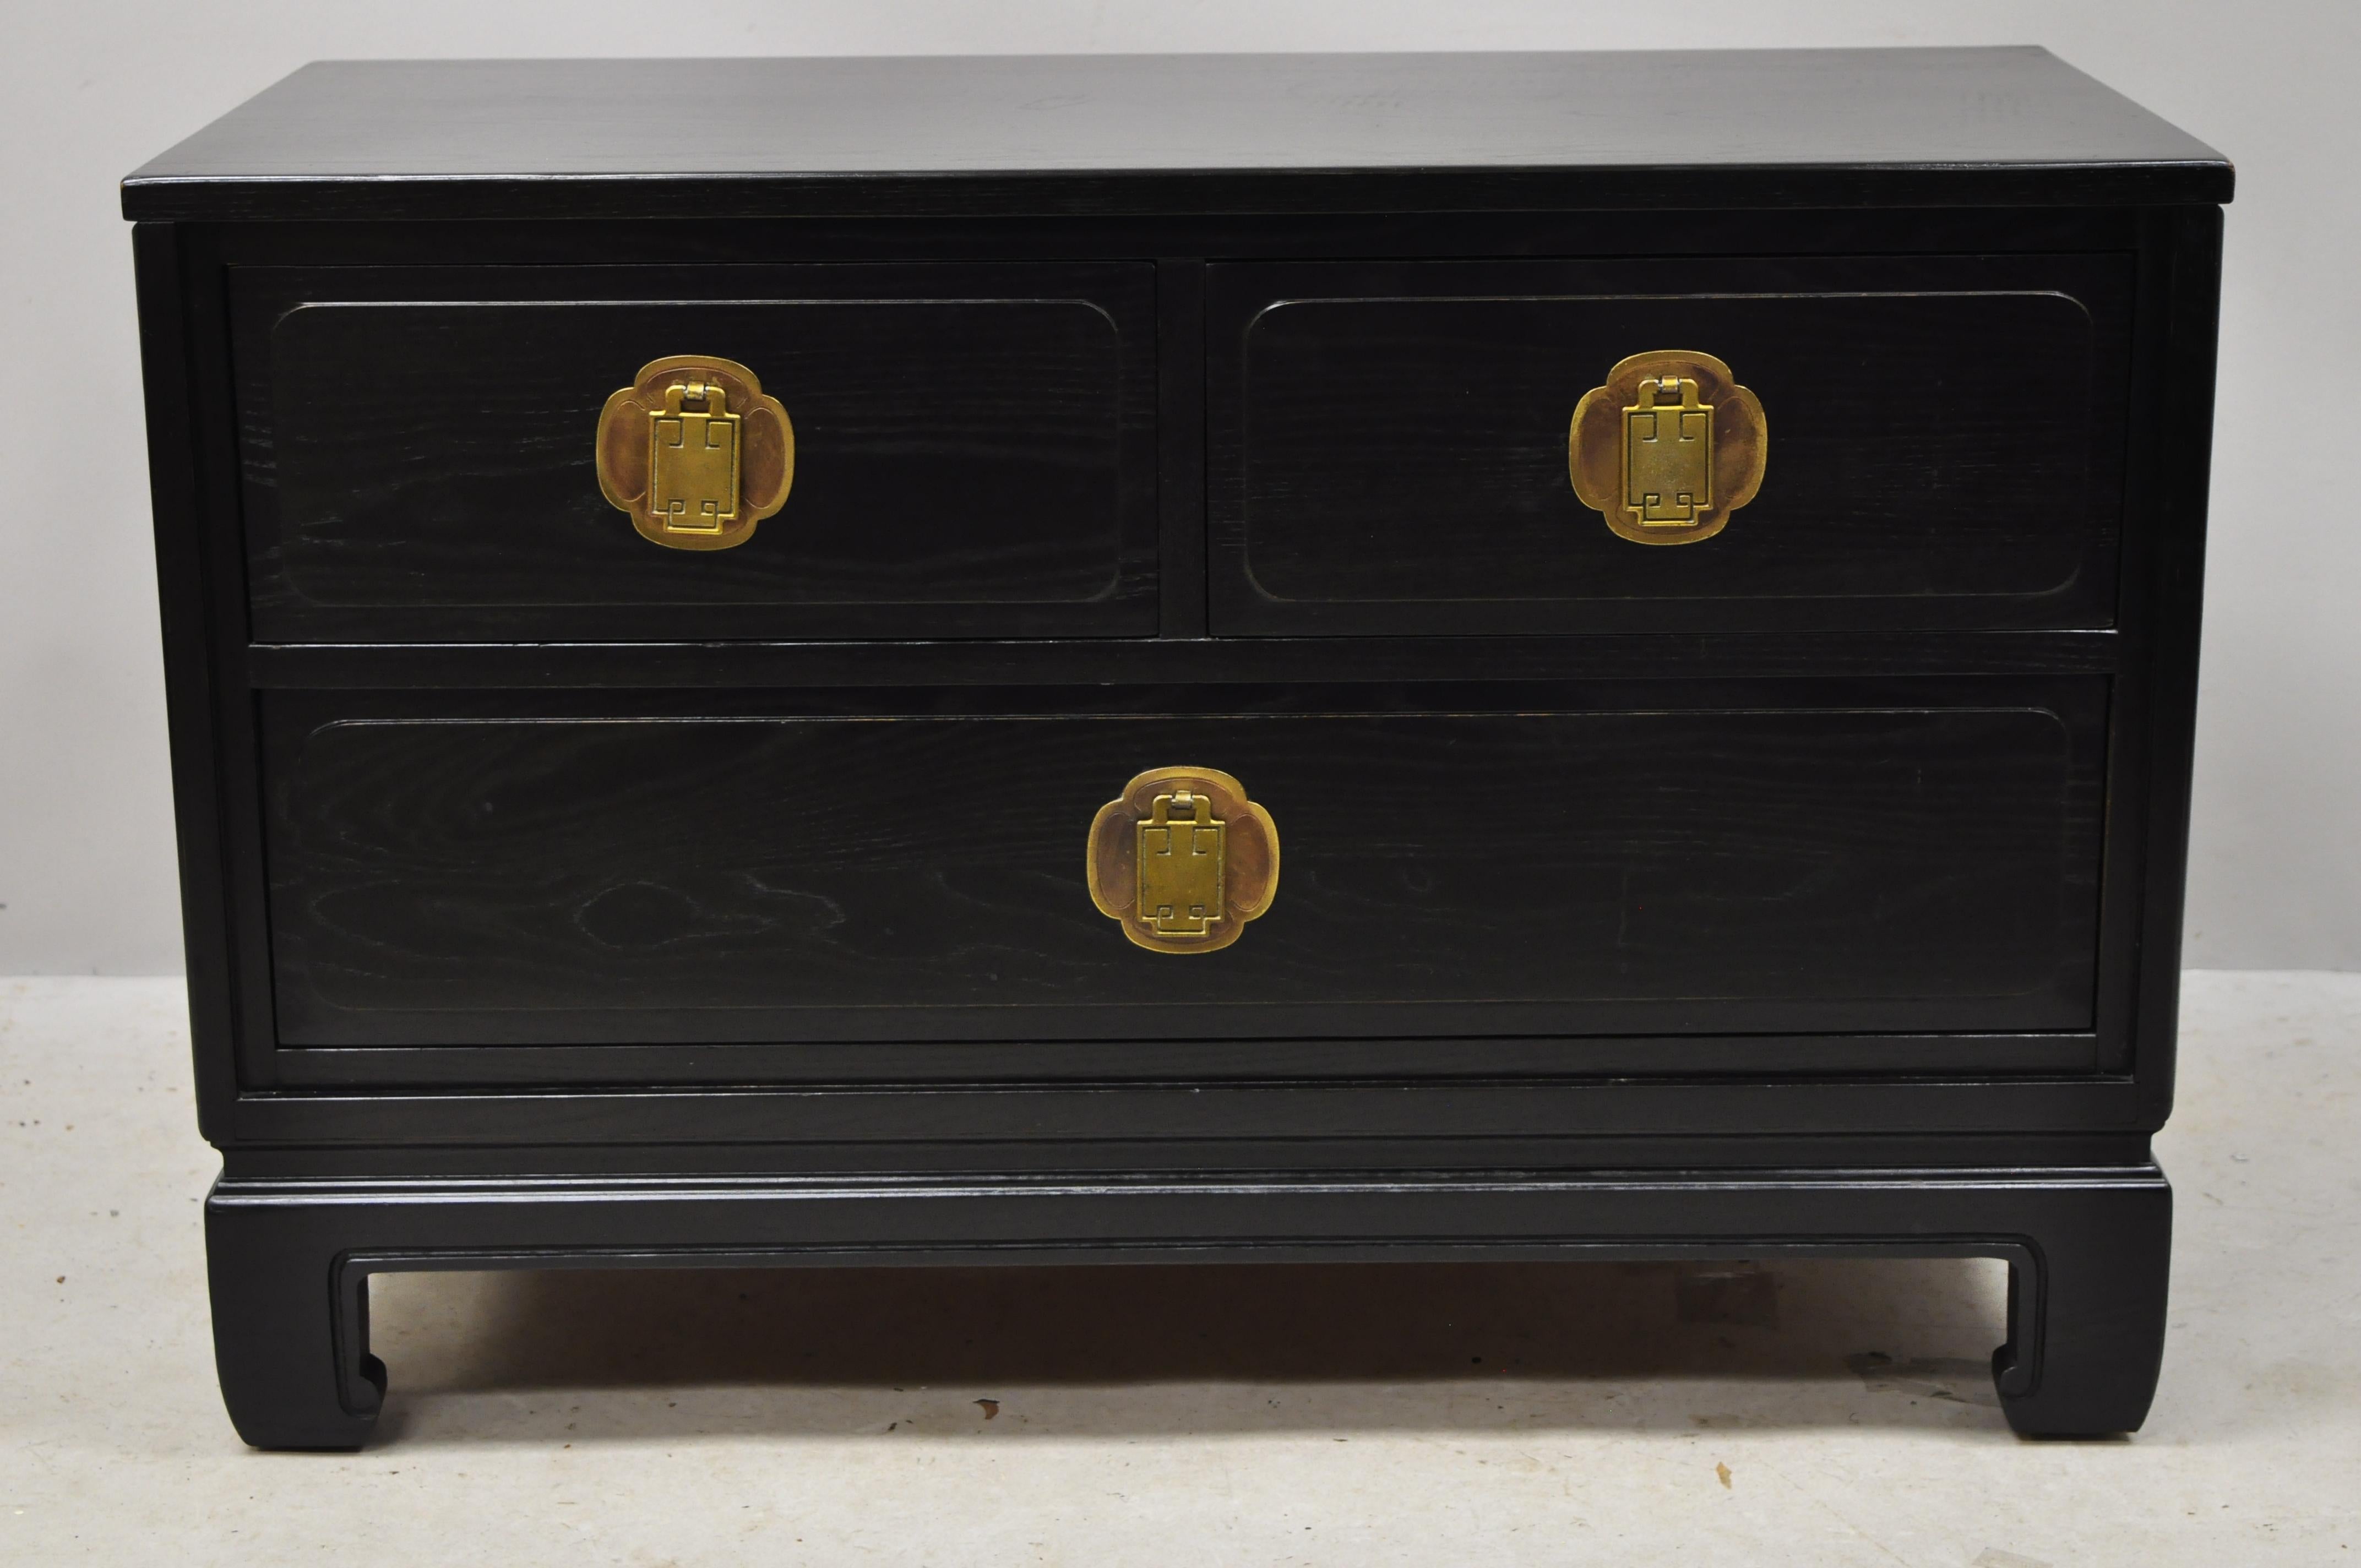 Davis Cabinet Co James Mont style ebonized oriental chinoiserie lacquer 3-drawer chest. Item features Ming style feet, black lacquer ebonized finish, solid wood construction, original stamp, 3 dovetailed drawers, solid brass hardware, quality